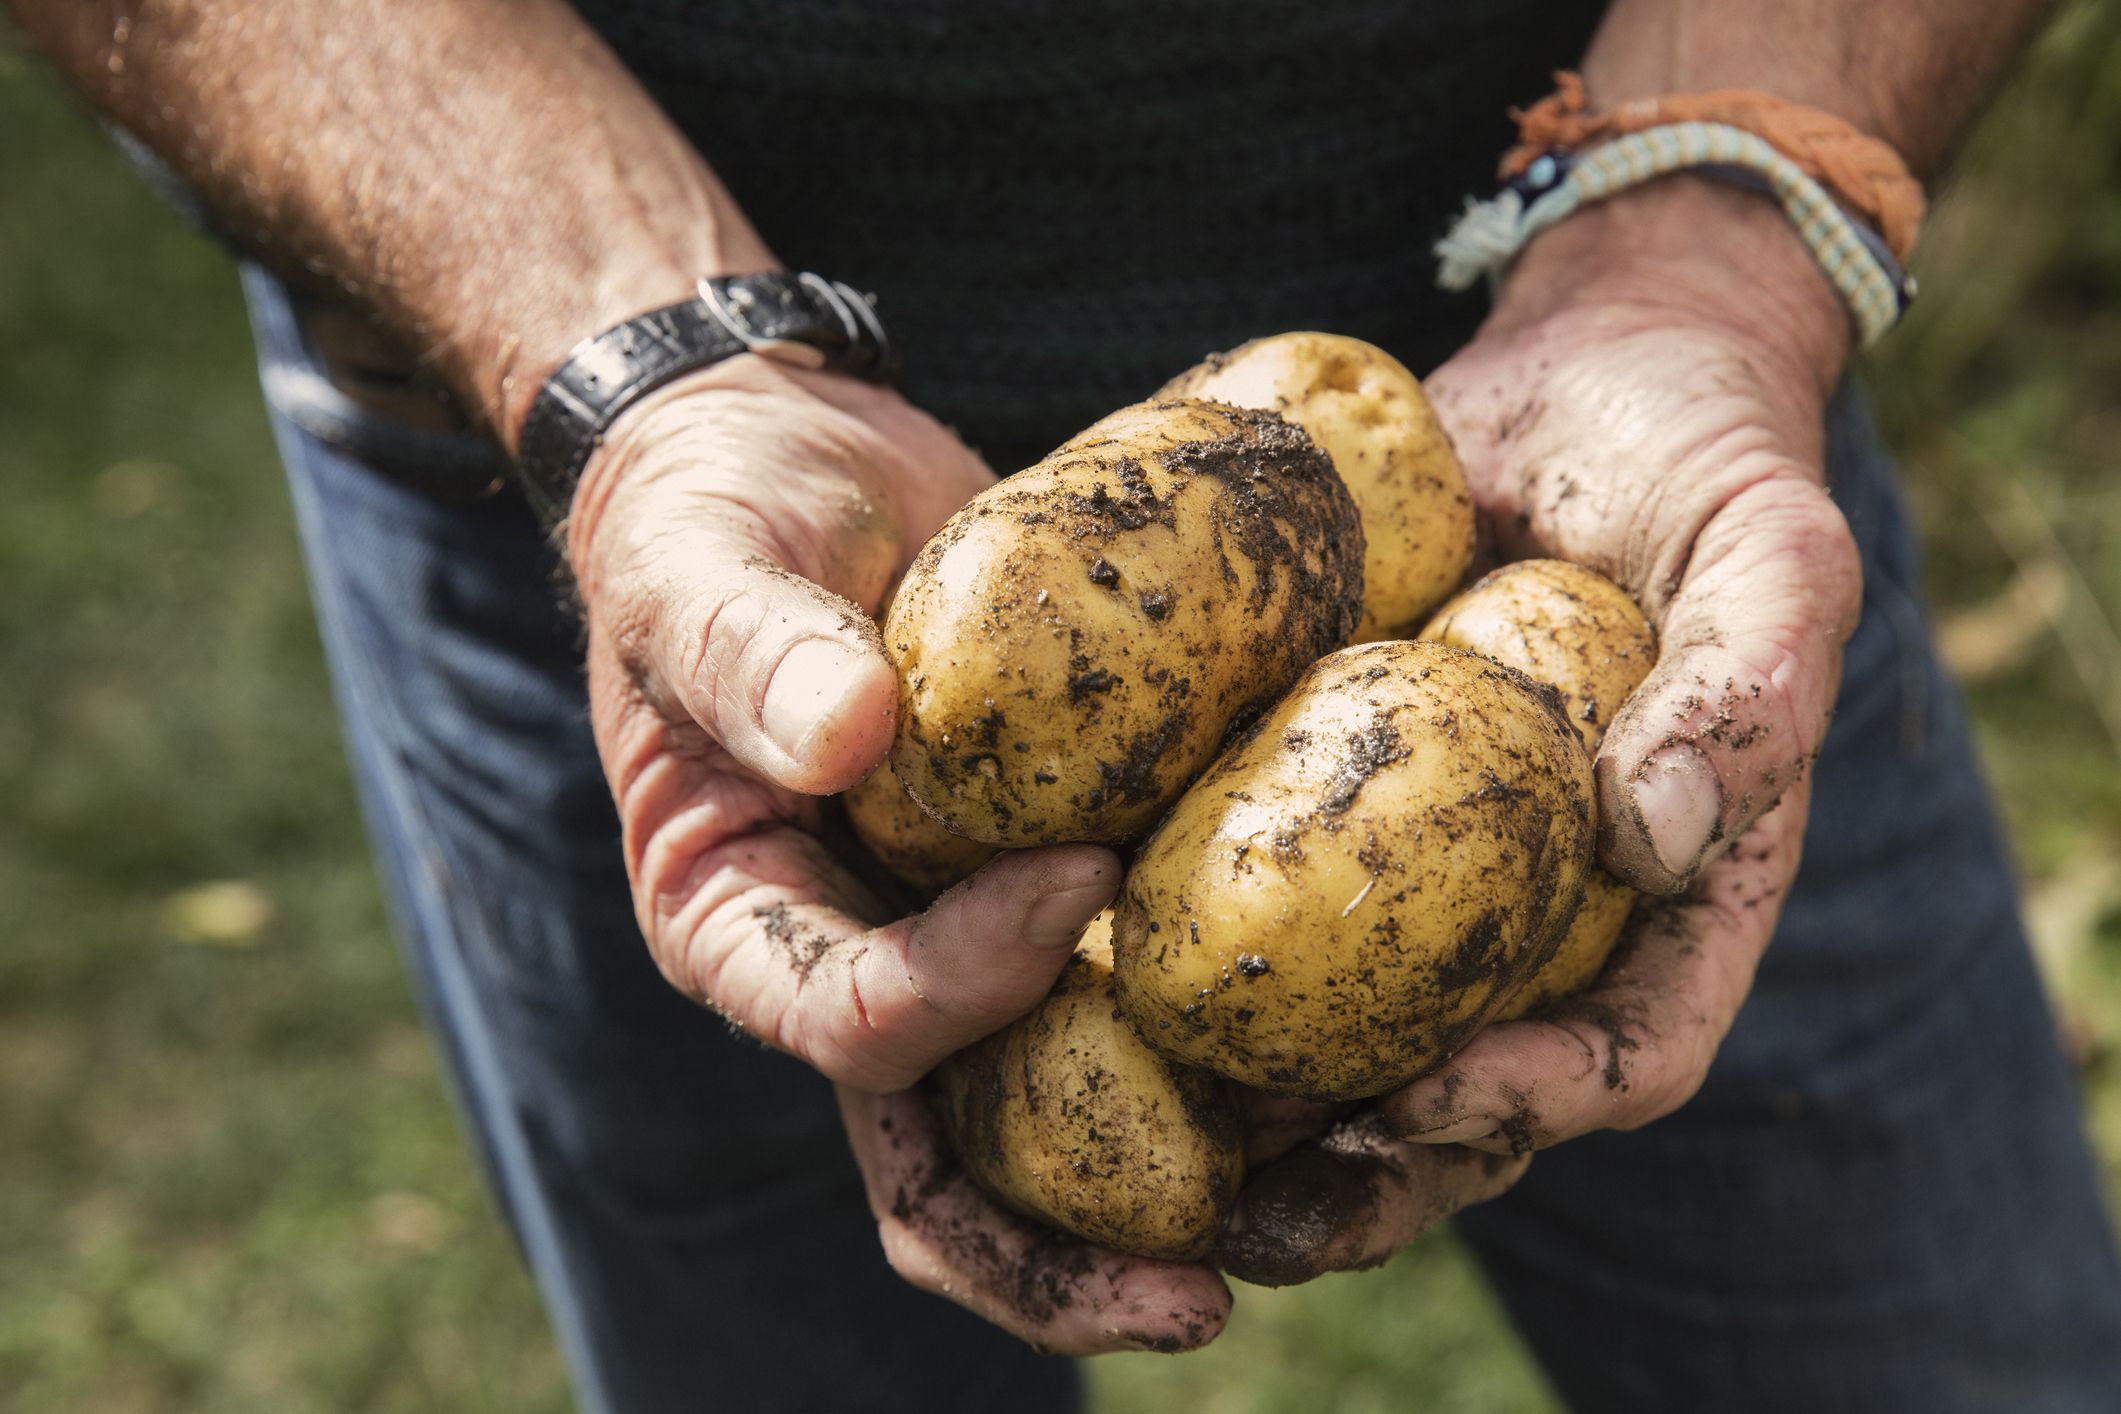 Are Potatoes Healthy? - Potato Nutrition, Weight Loss, Diet